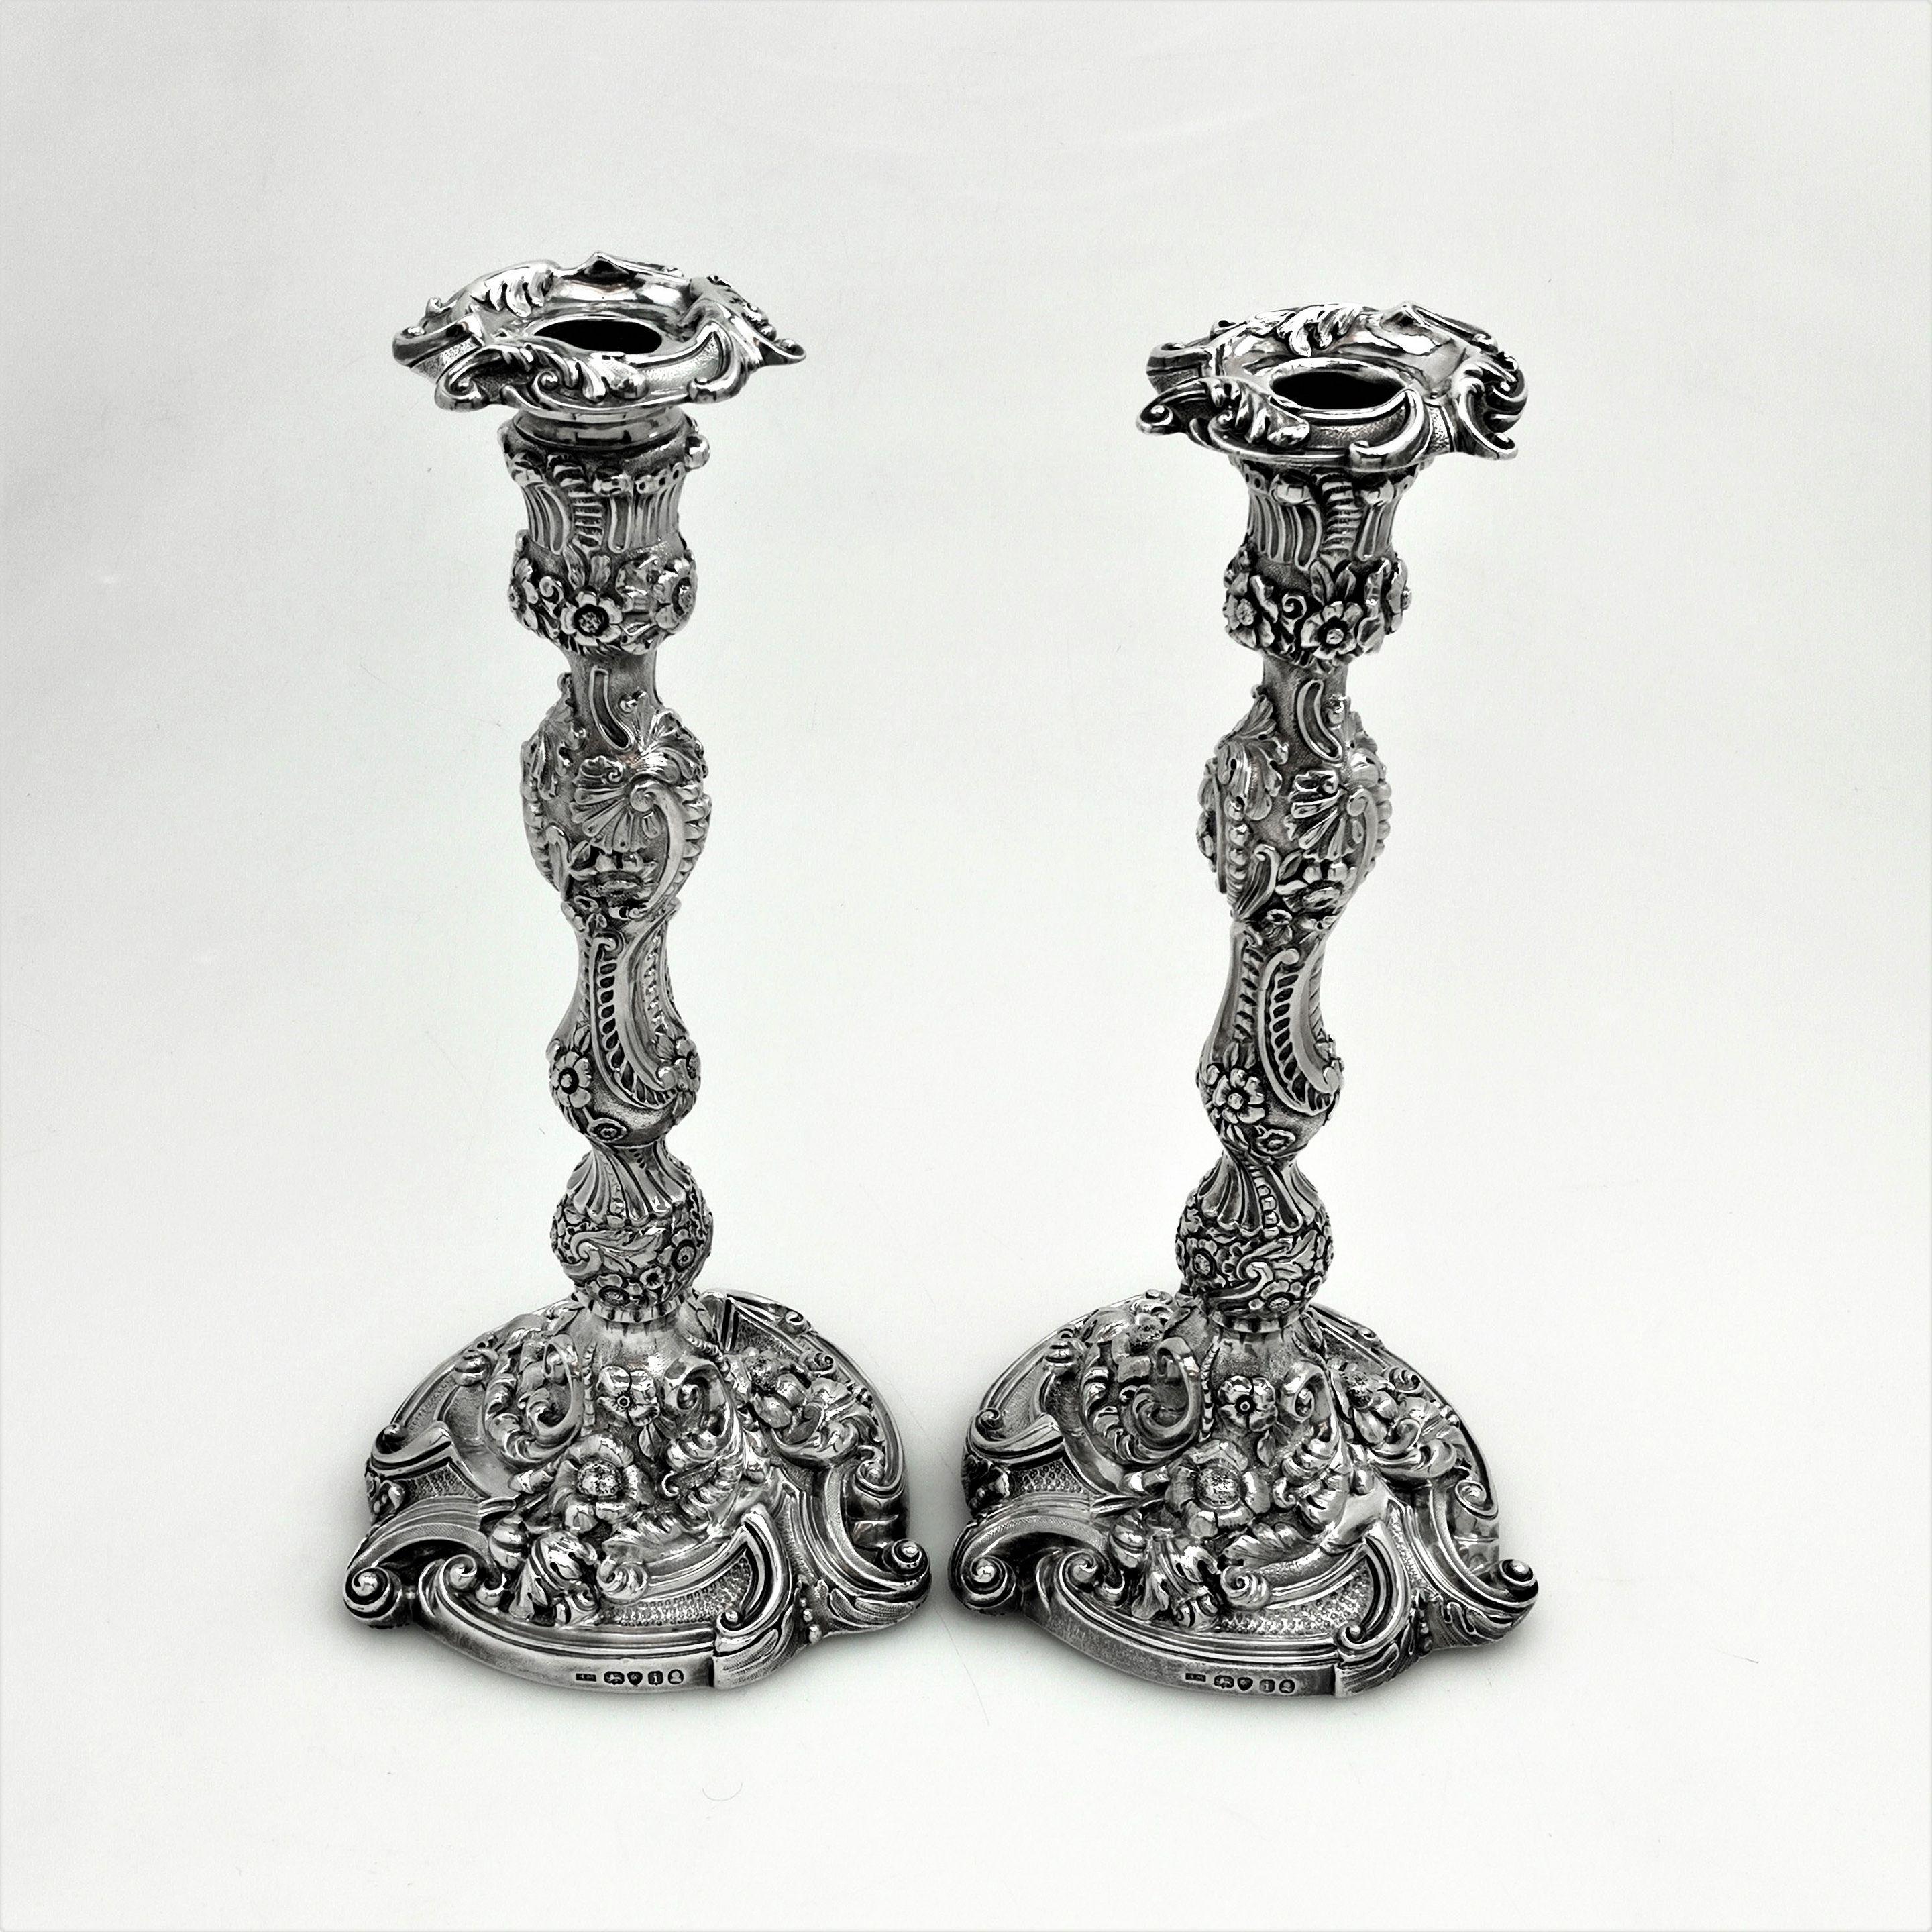 An impressive set of 4 Georgian antique solid silver rococo revival candlesticks. This set of Georgian candlesticks are cast and feature a beautiful floral and scroll design on the spread base and shaped column. The pattern, especially on the base,